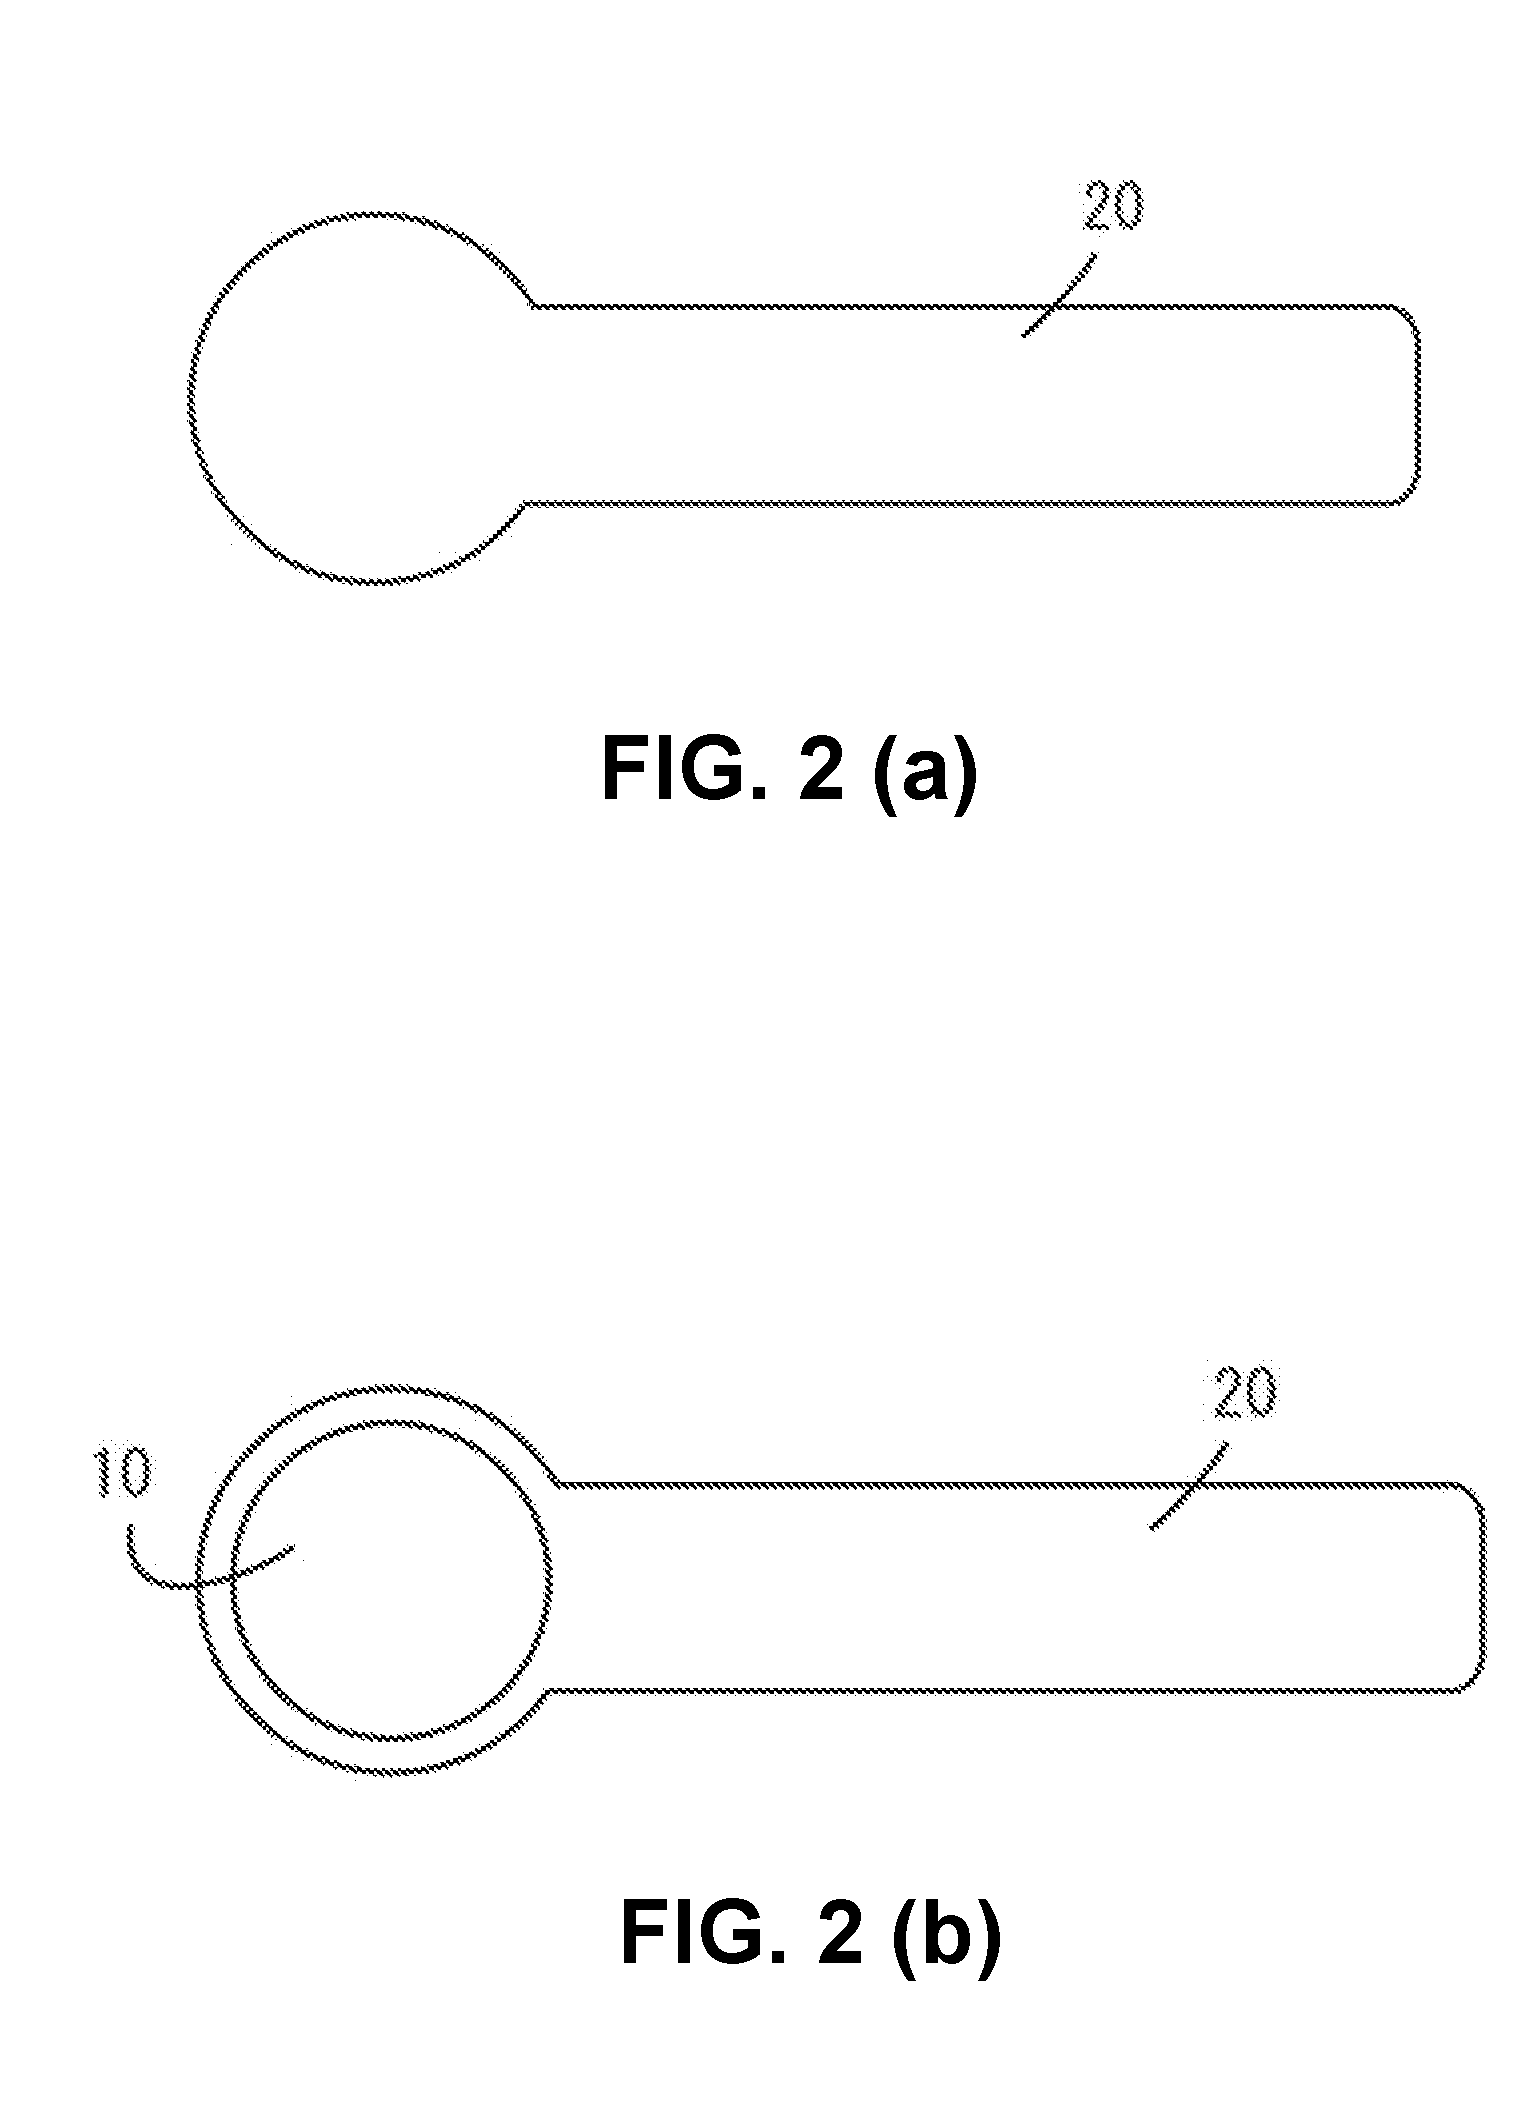 Skin stretching tape and method of alleviating pain